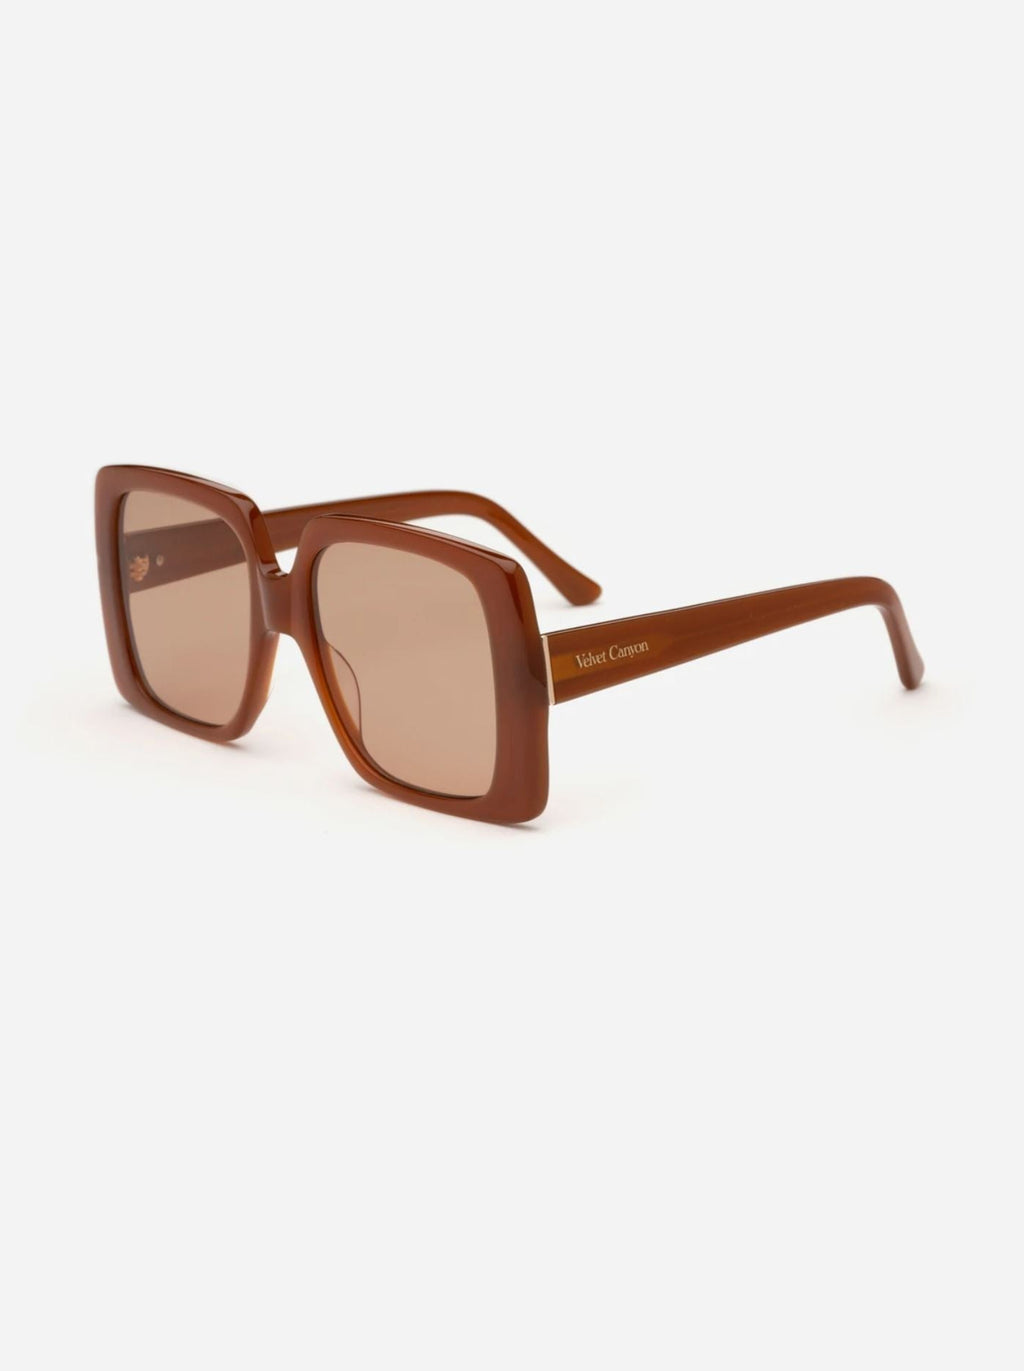 sideview of brown square-framed sunglasses